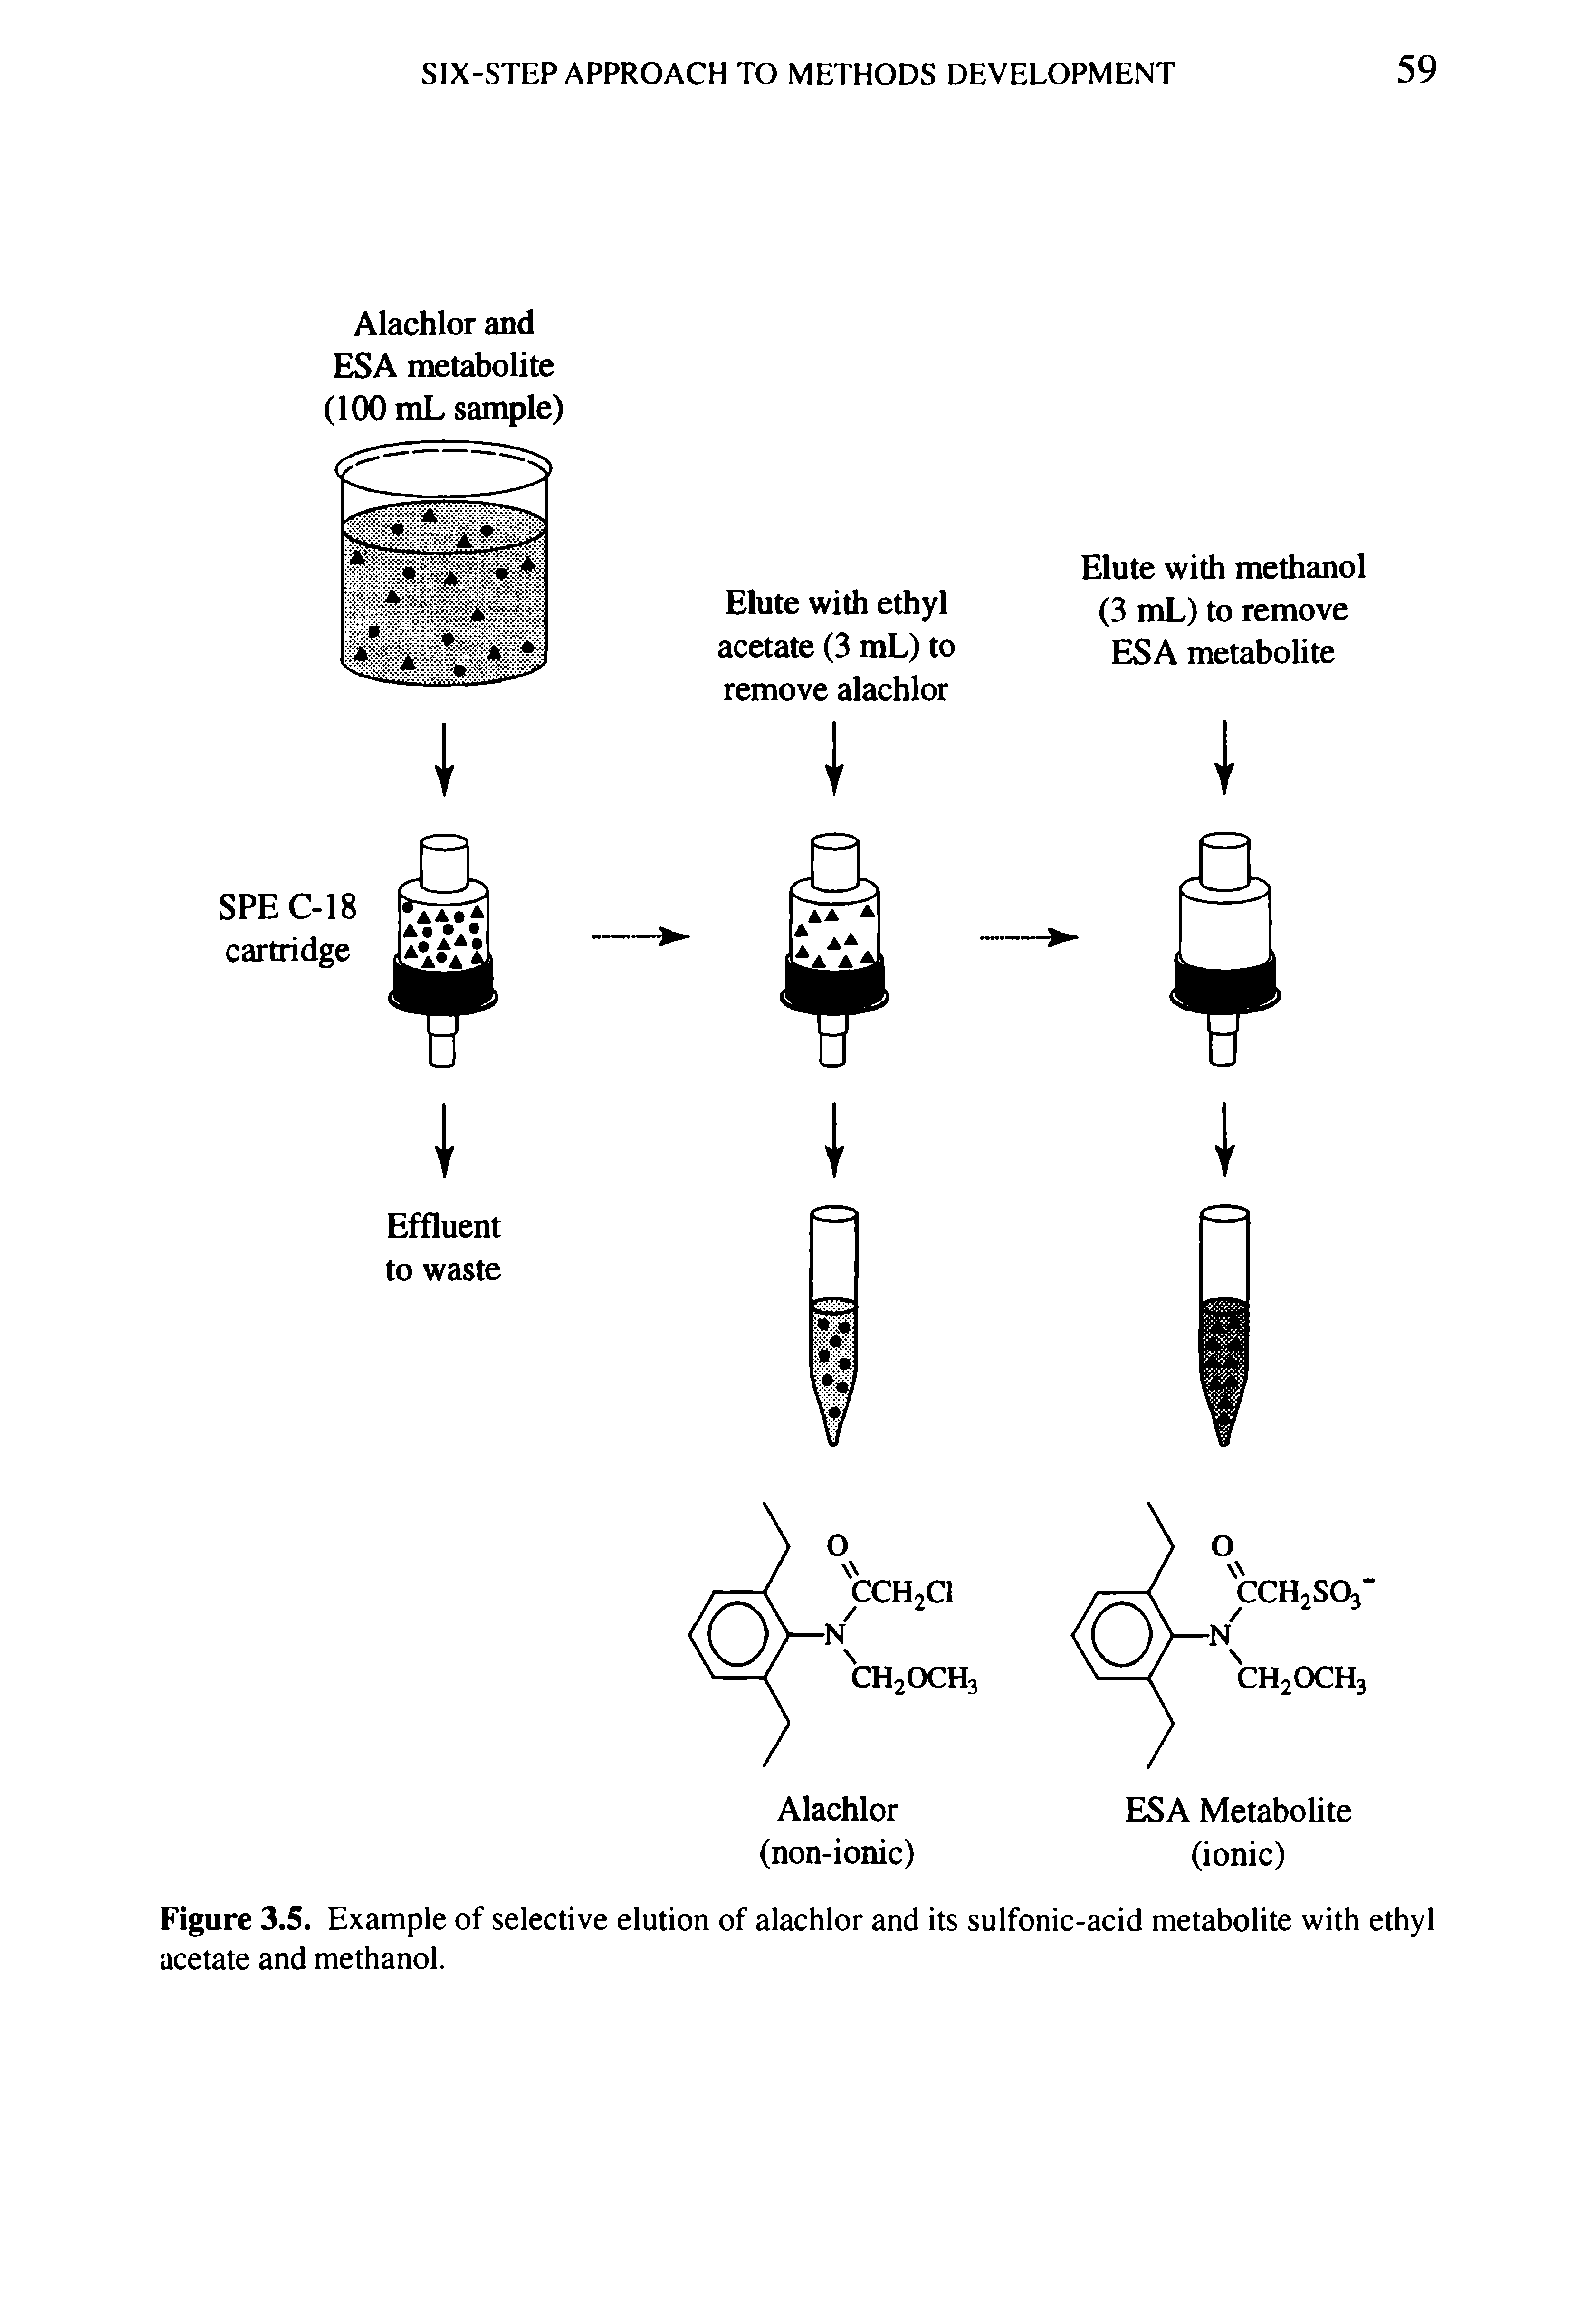 Figure 3.5. Example of selective elution of alachlor and its sulfonic-acid metabolite with ethyl acetate and methanol.